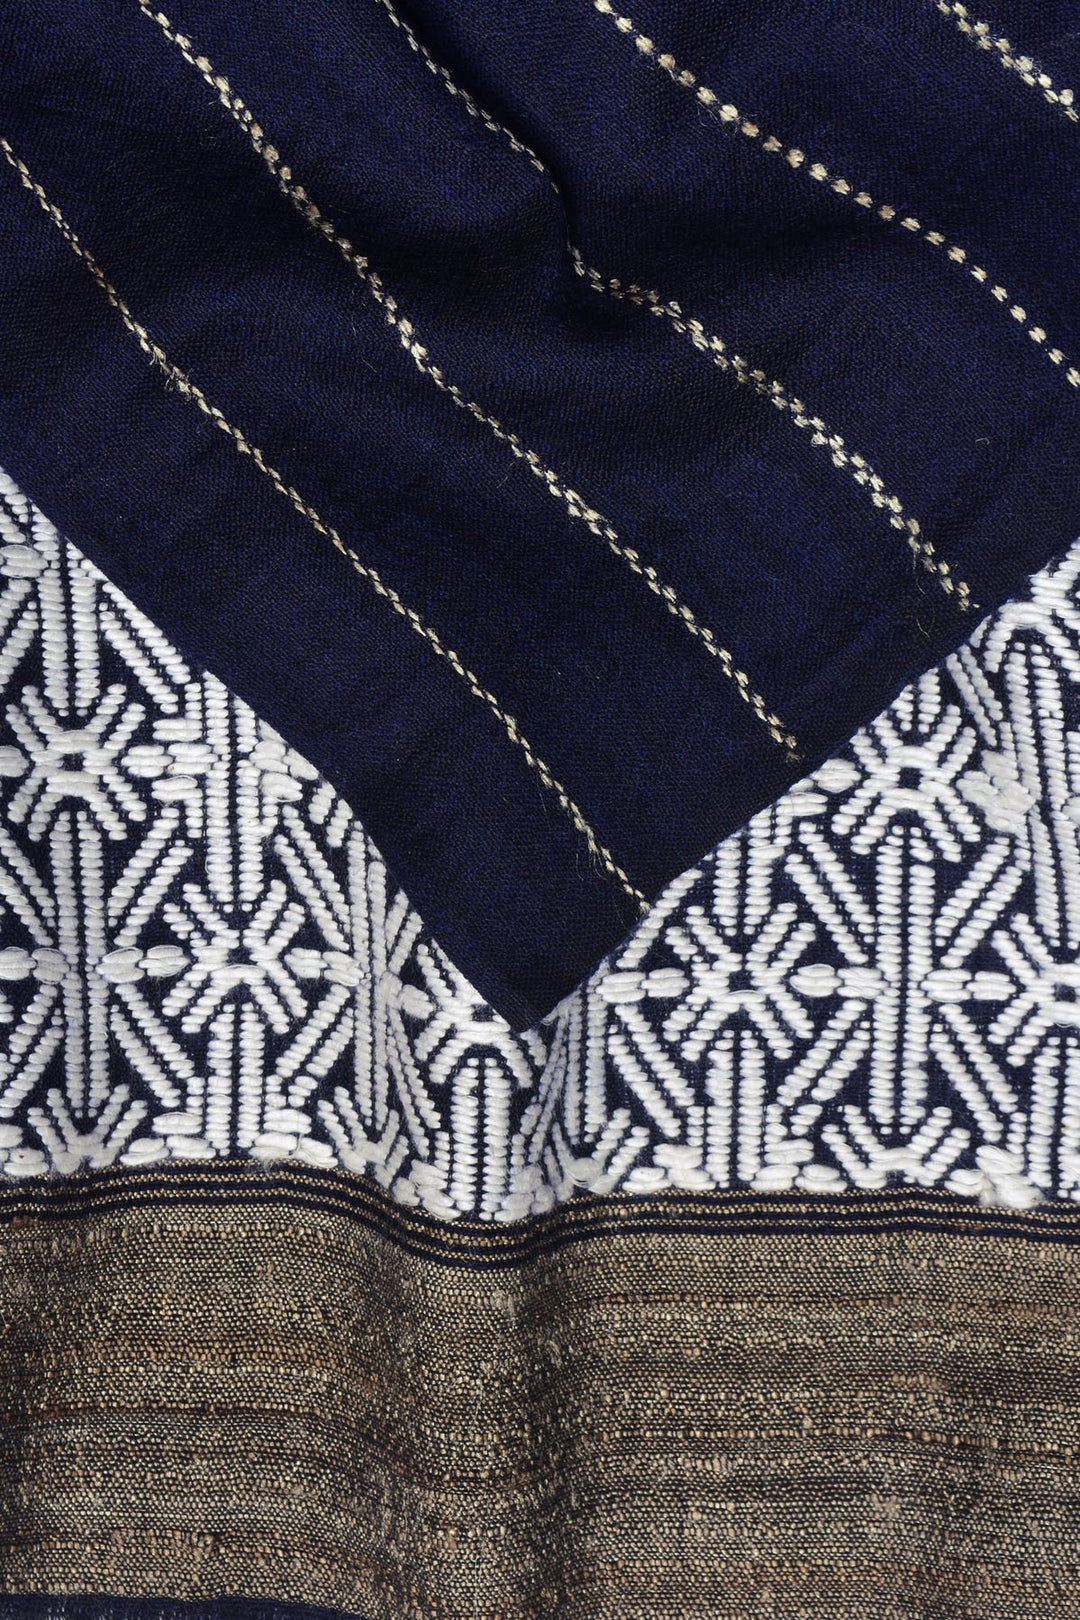 Blue Cashmere Stole with Abstract African Design | Kirk Soft Cashmere Stole - Blue